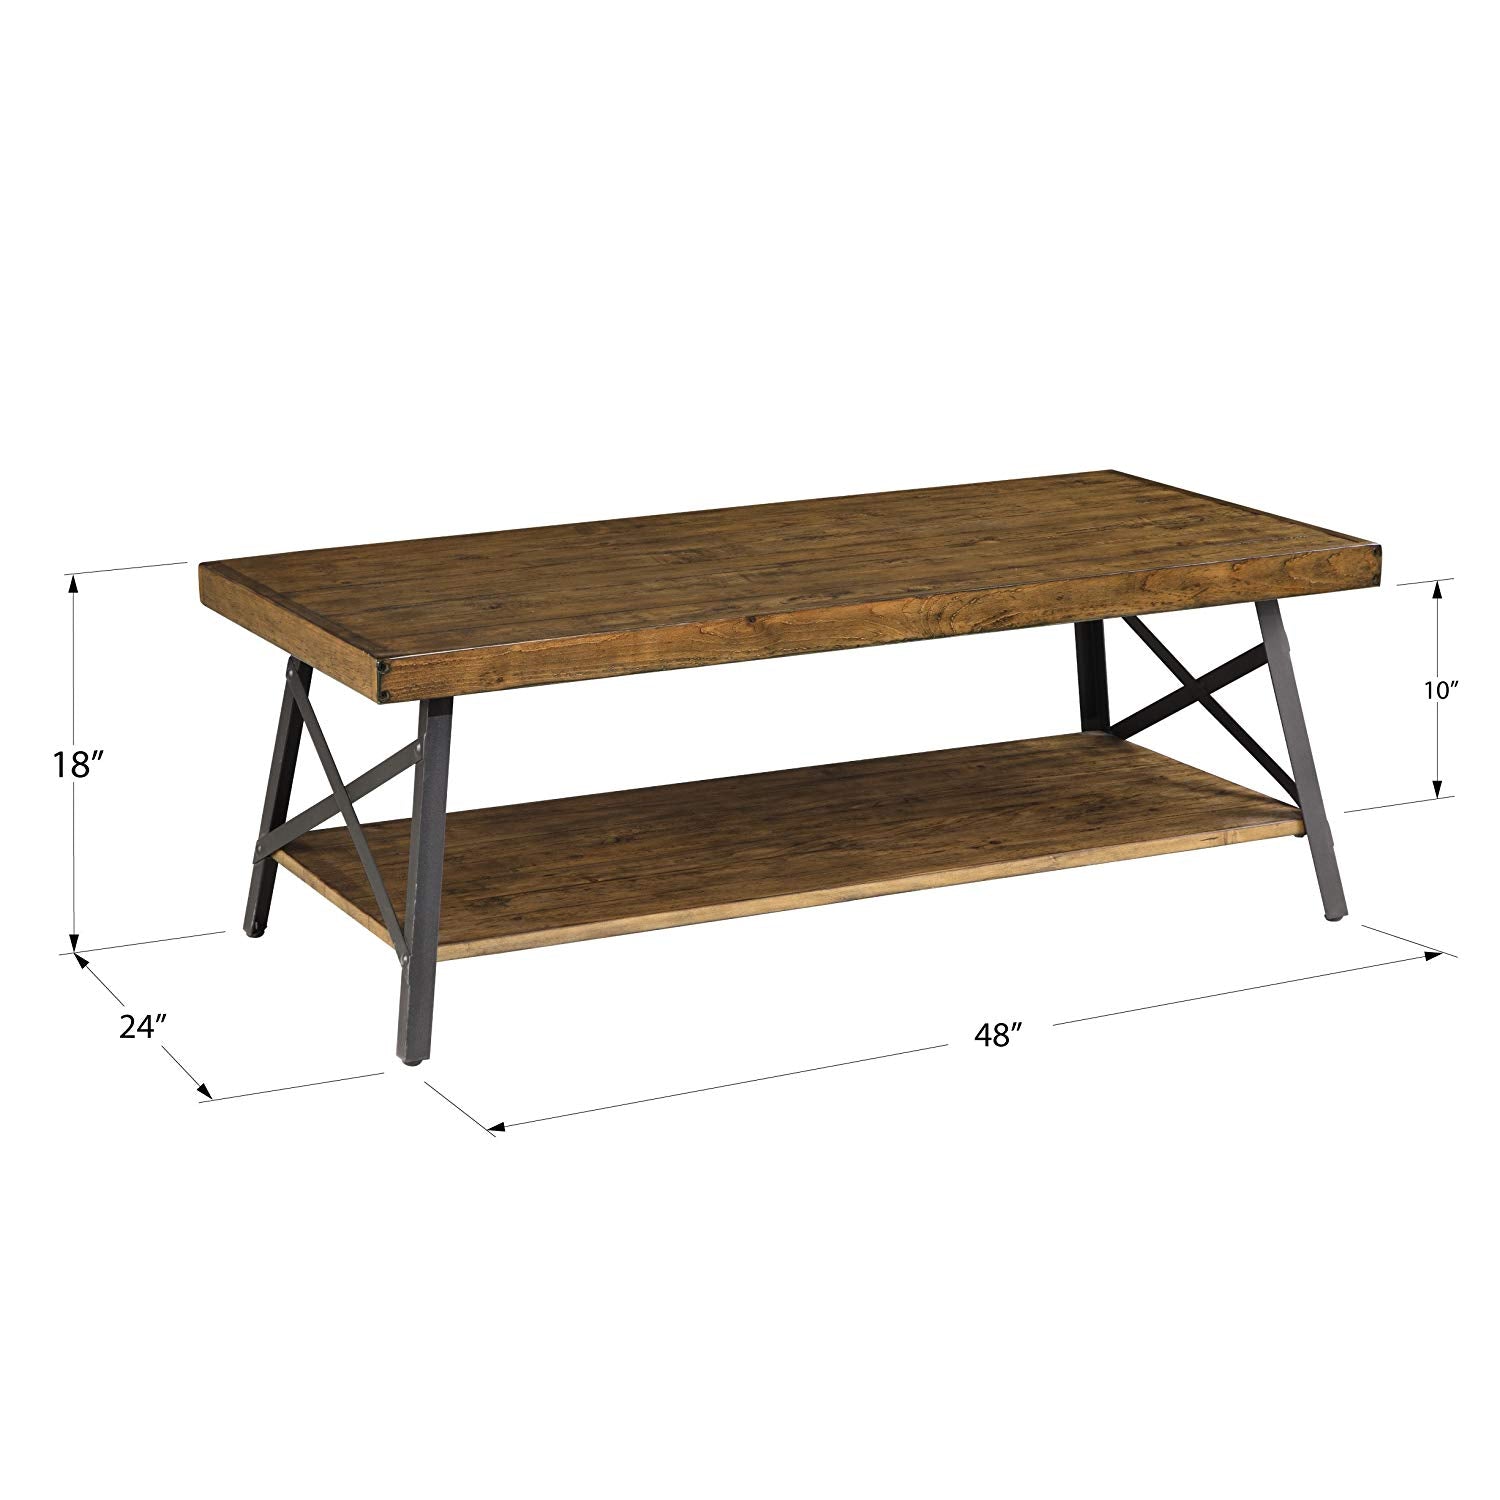 Emerald Home Chandler Rustic Industrial Solid Wood and Steel Coffee Table with Open Shelf